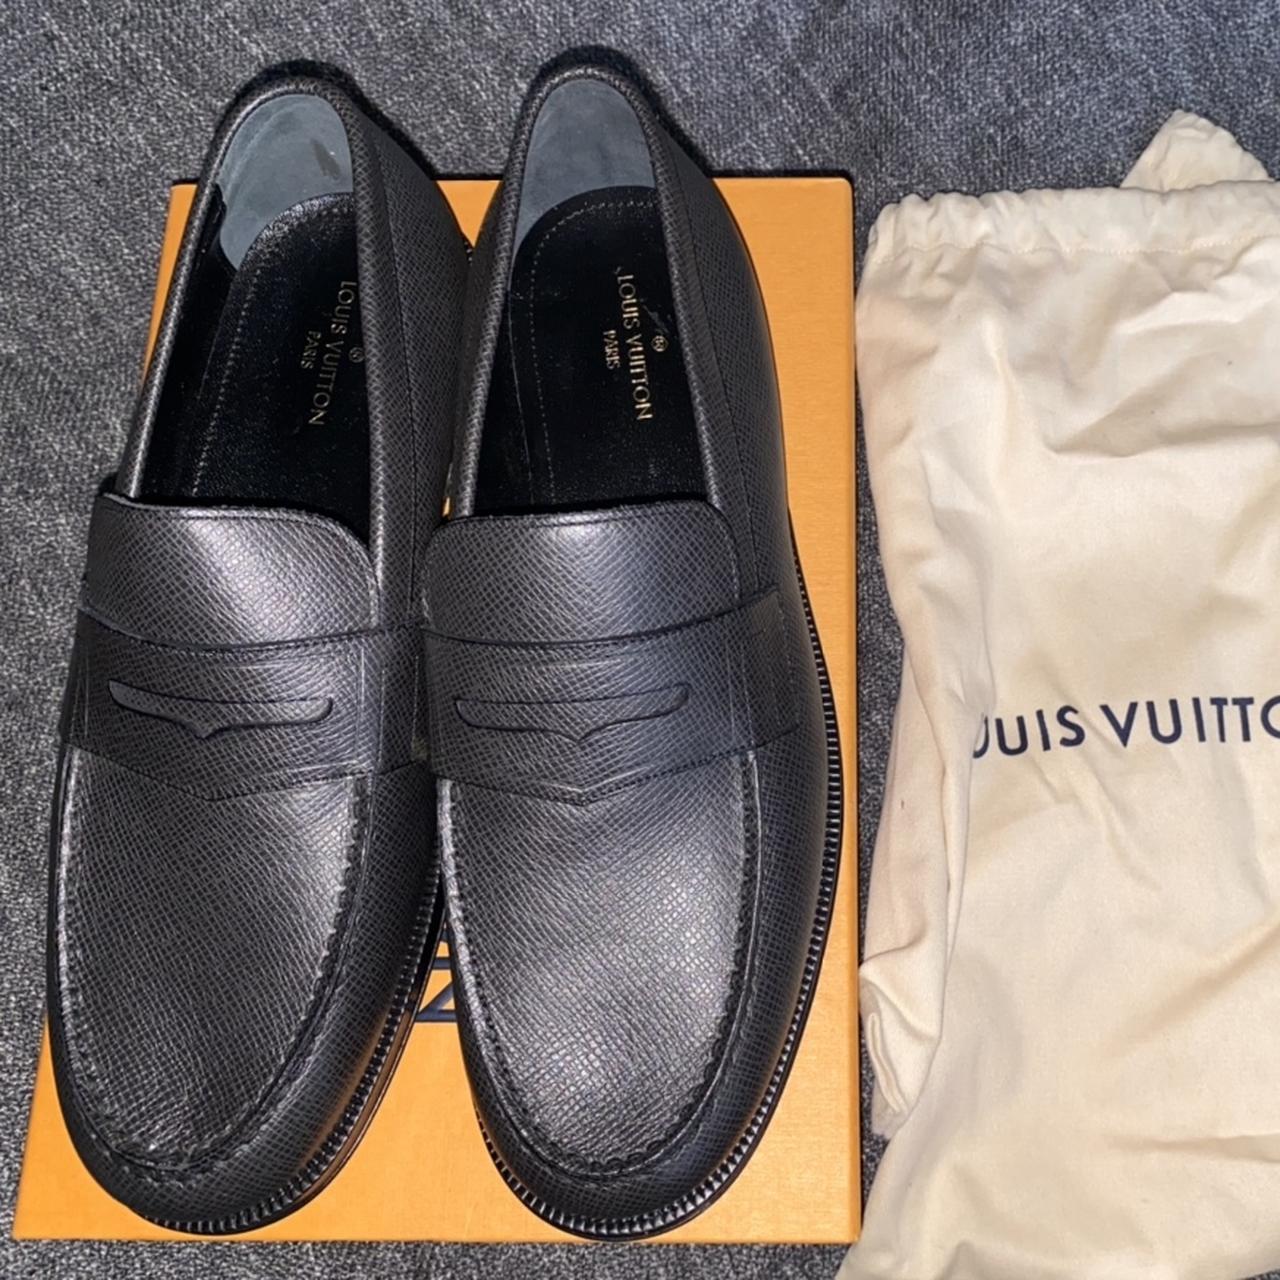 Louis Vuitton major loafer. Grained leather. These - Depop